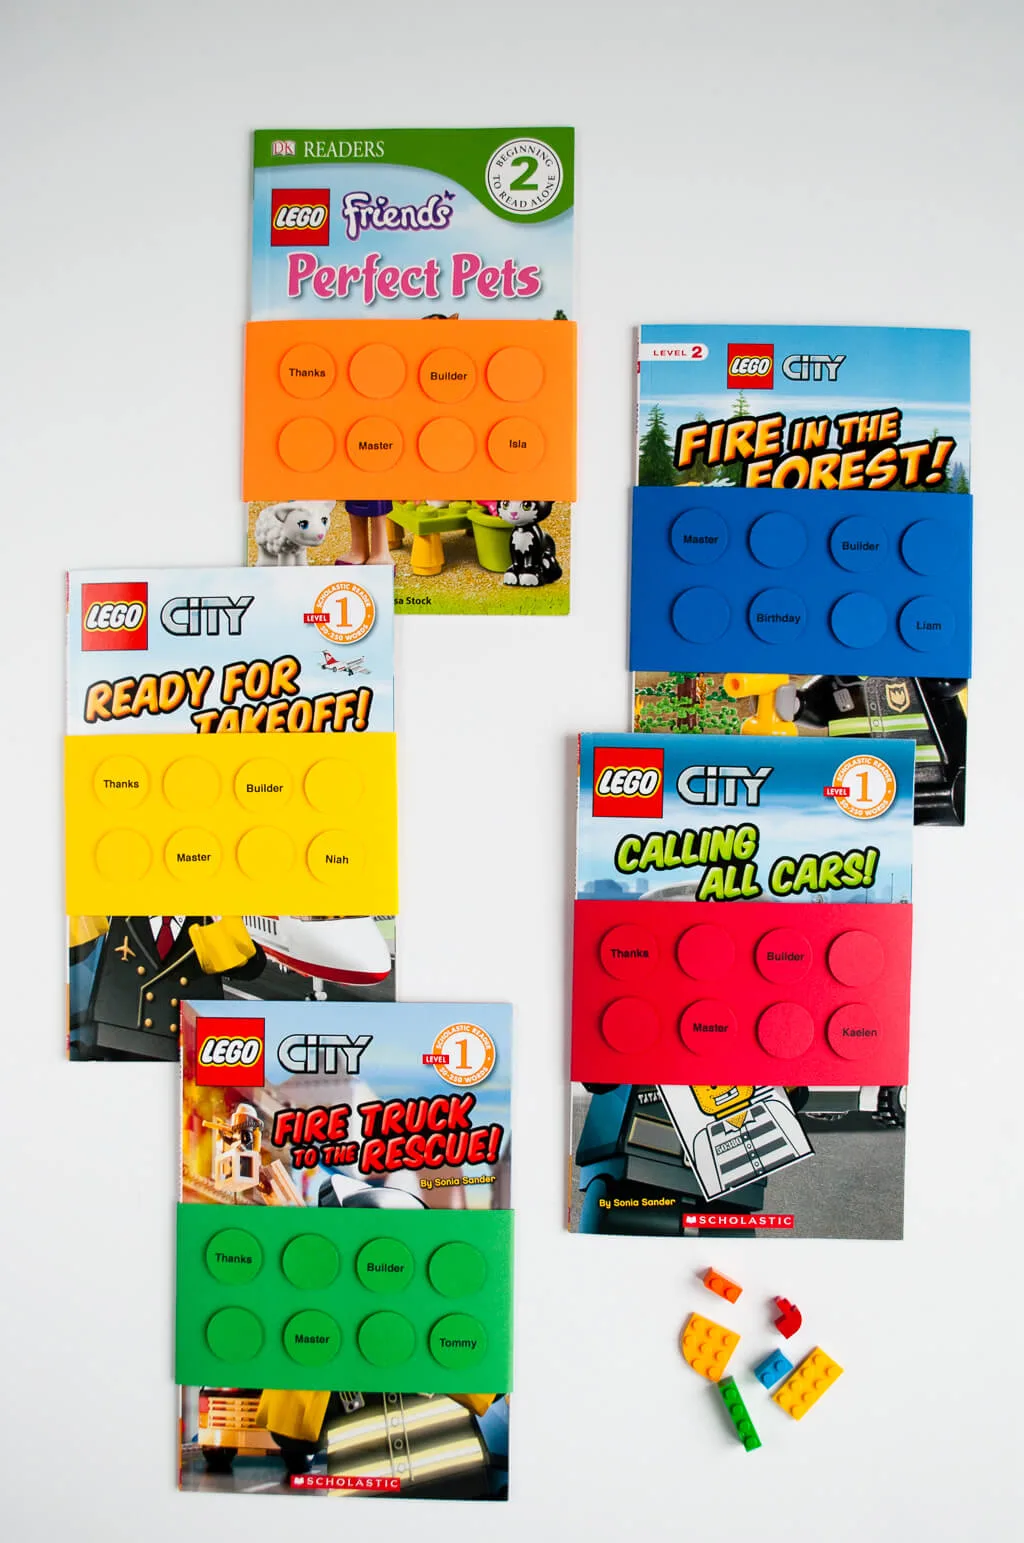 Easy DIY LEGO Birthday Party Favors: Wrap LEGO books with personalized paper LEGO brick book wraps using colored paper and a circle craft punch. It's an easy and useful LEGO birthday party favor idea!